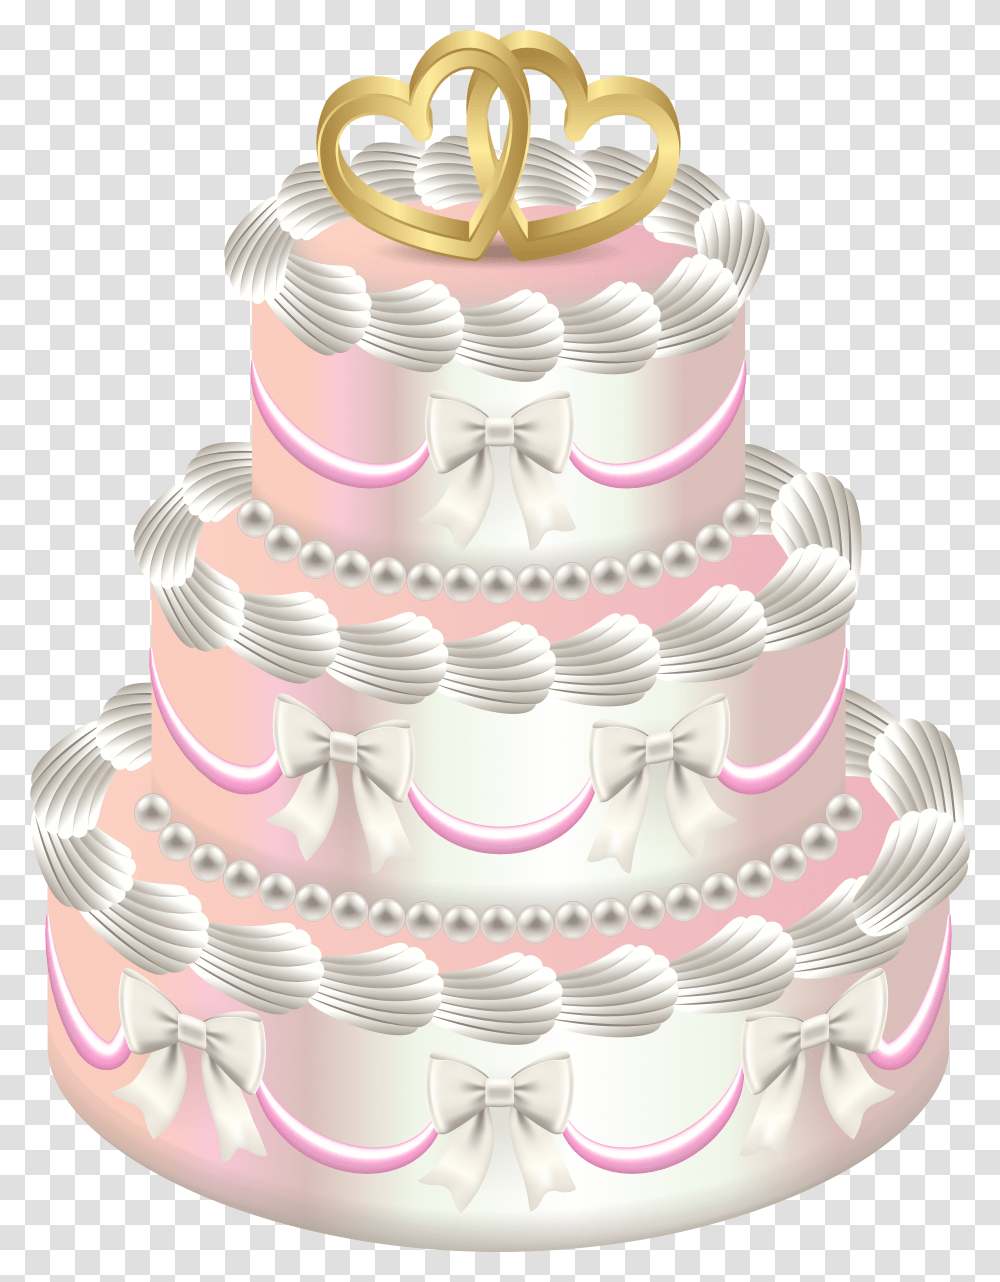 Tall Clipart Birthday Cake Best Birthday Cake Hd Transparent Png